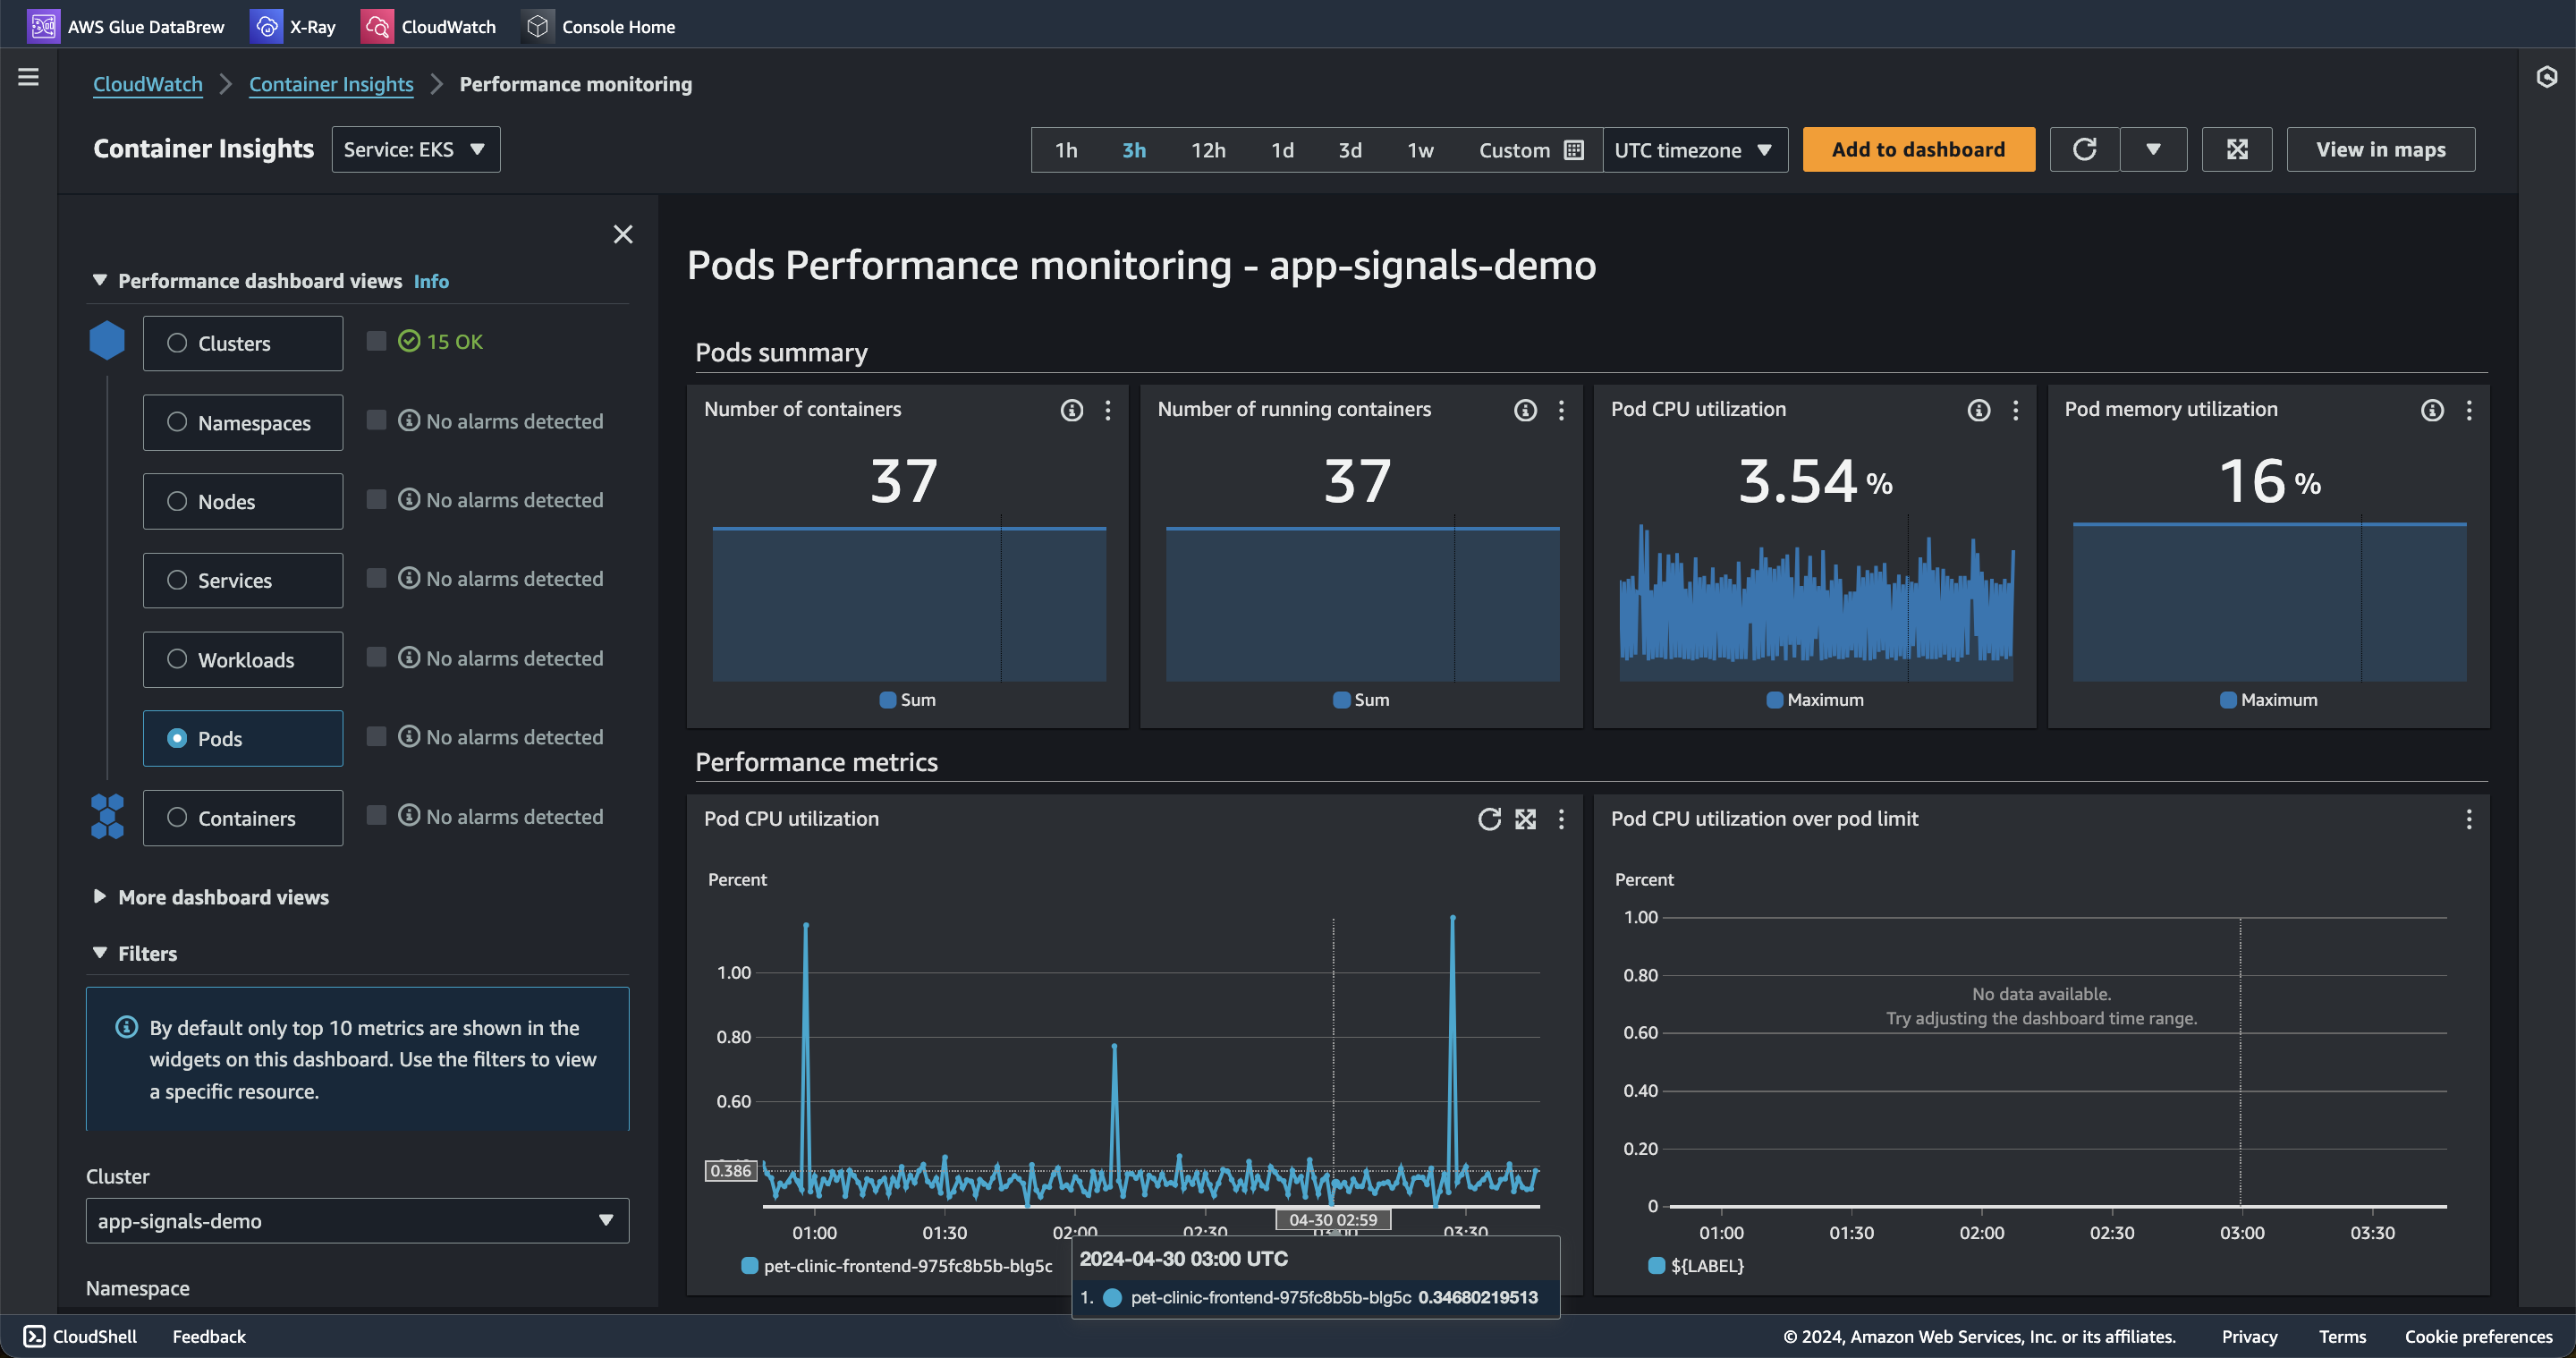 View infrastructure performance metrics in Container Insights